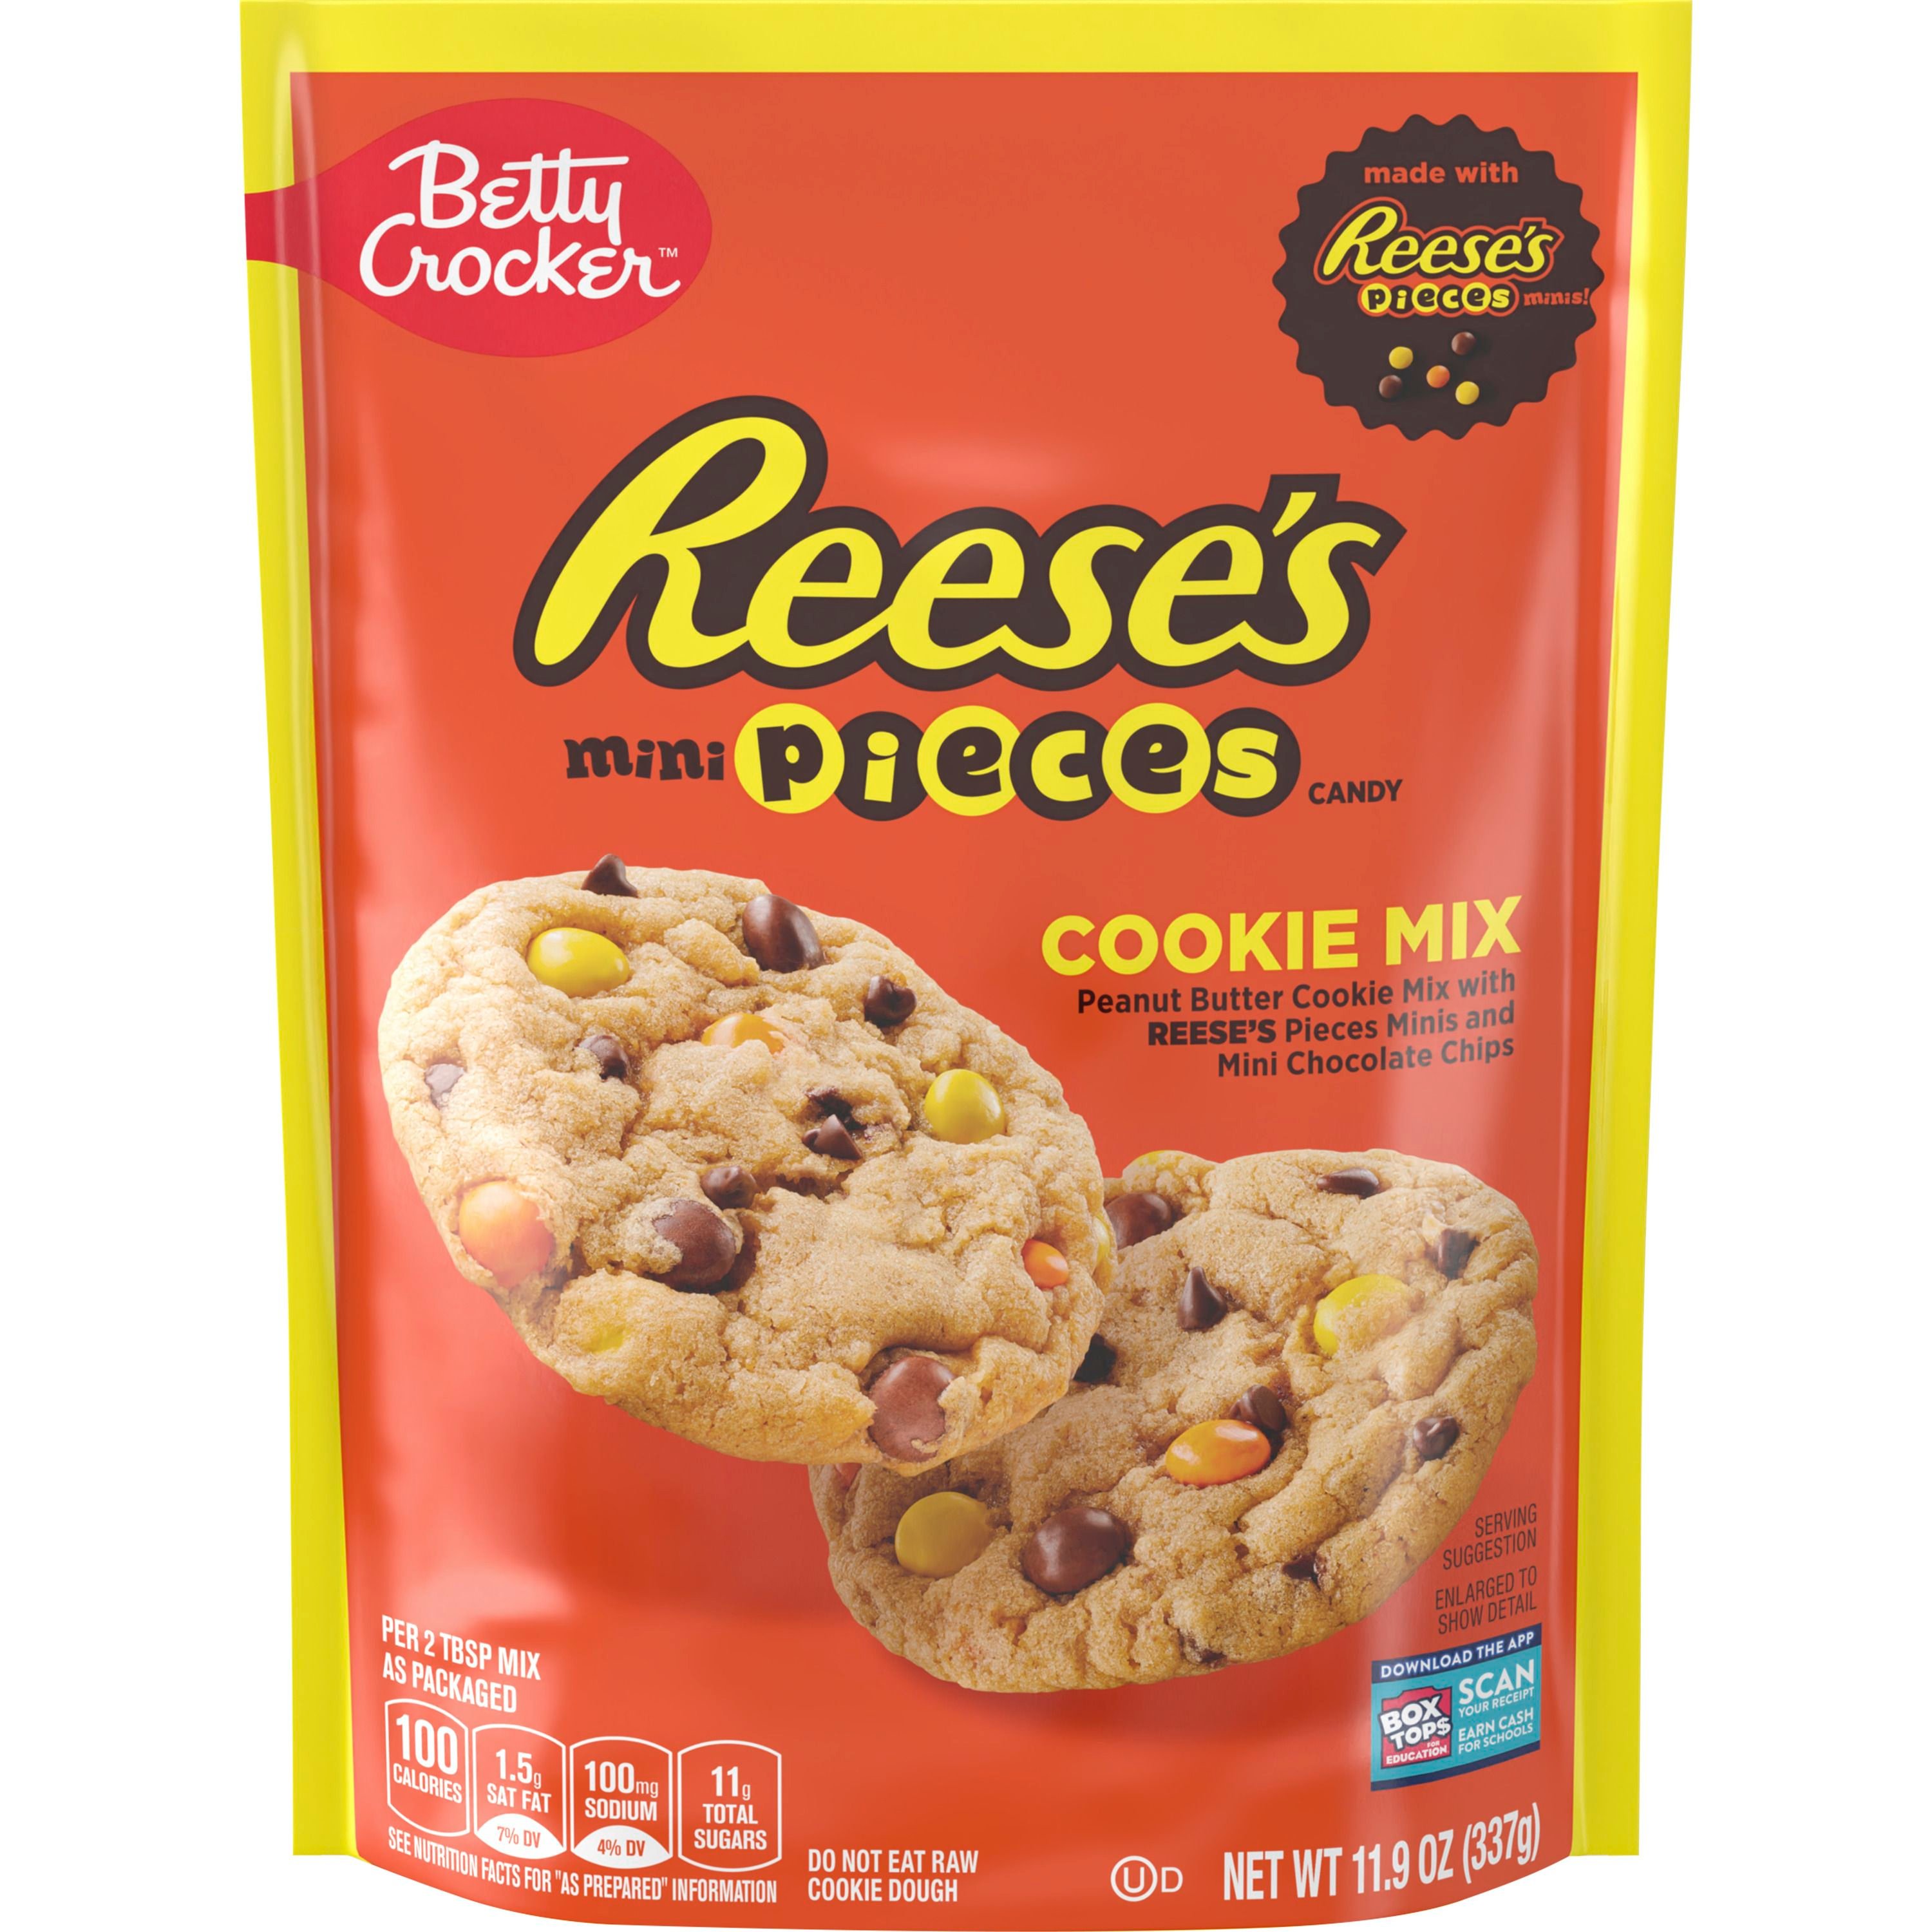 Betty Crocker REESE'S PIECES Cookie Mix, Peanut Butter Cookie Mix with REESE’S PIECES Minis and Mini Chocolate Chips, 11.9 oz - Front